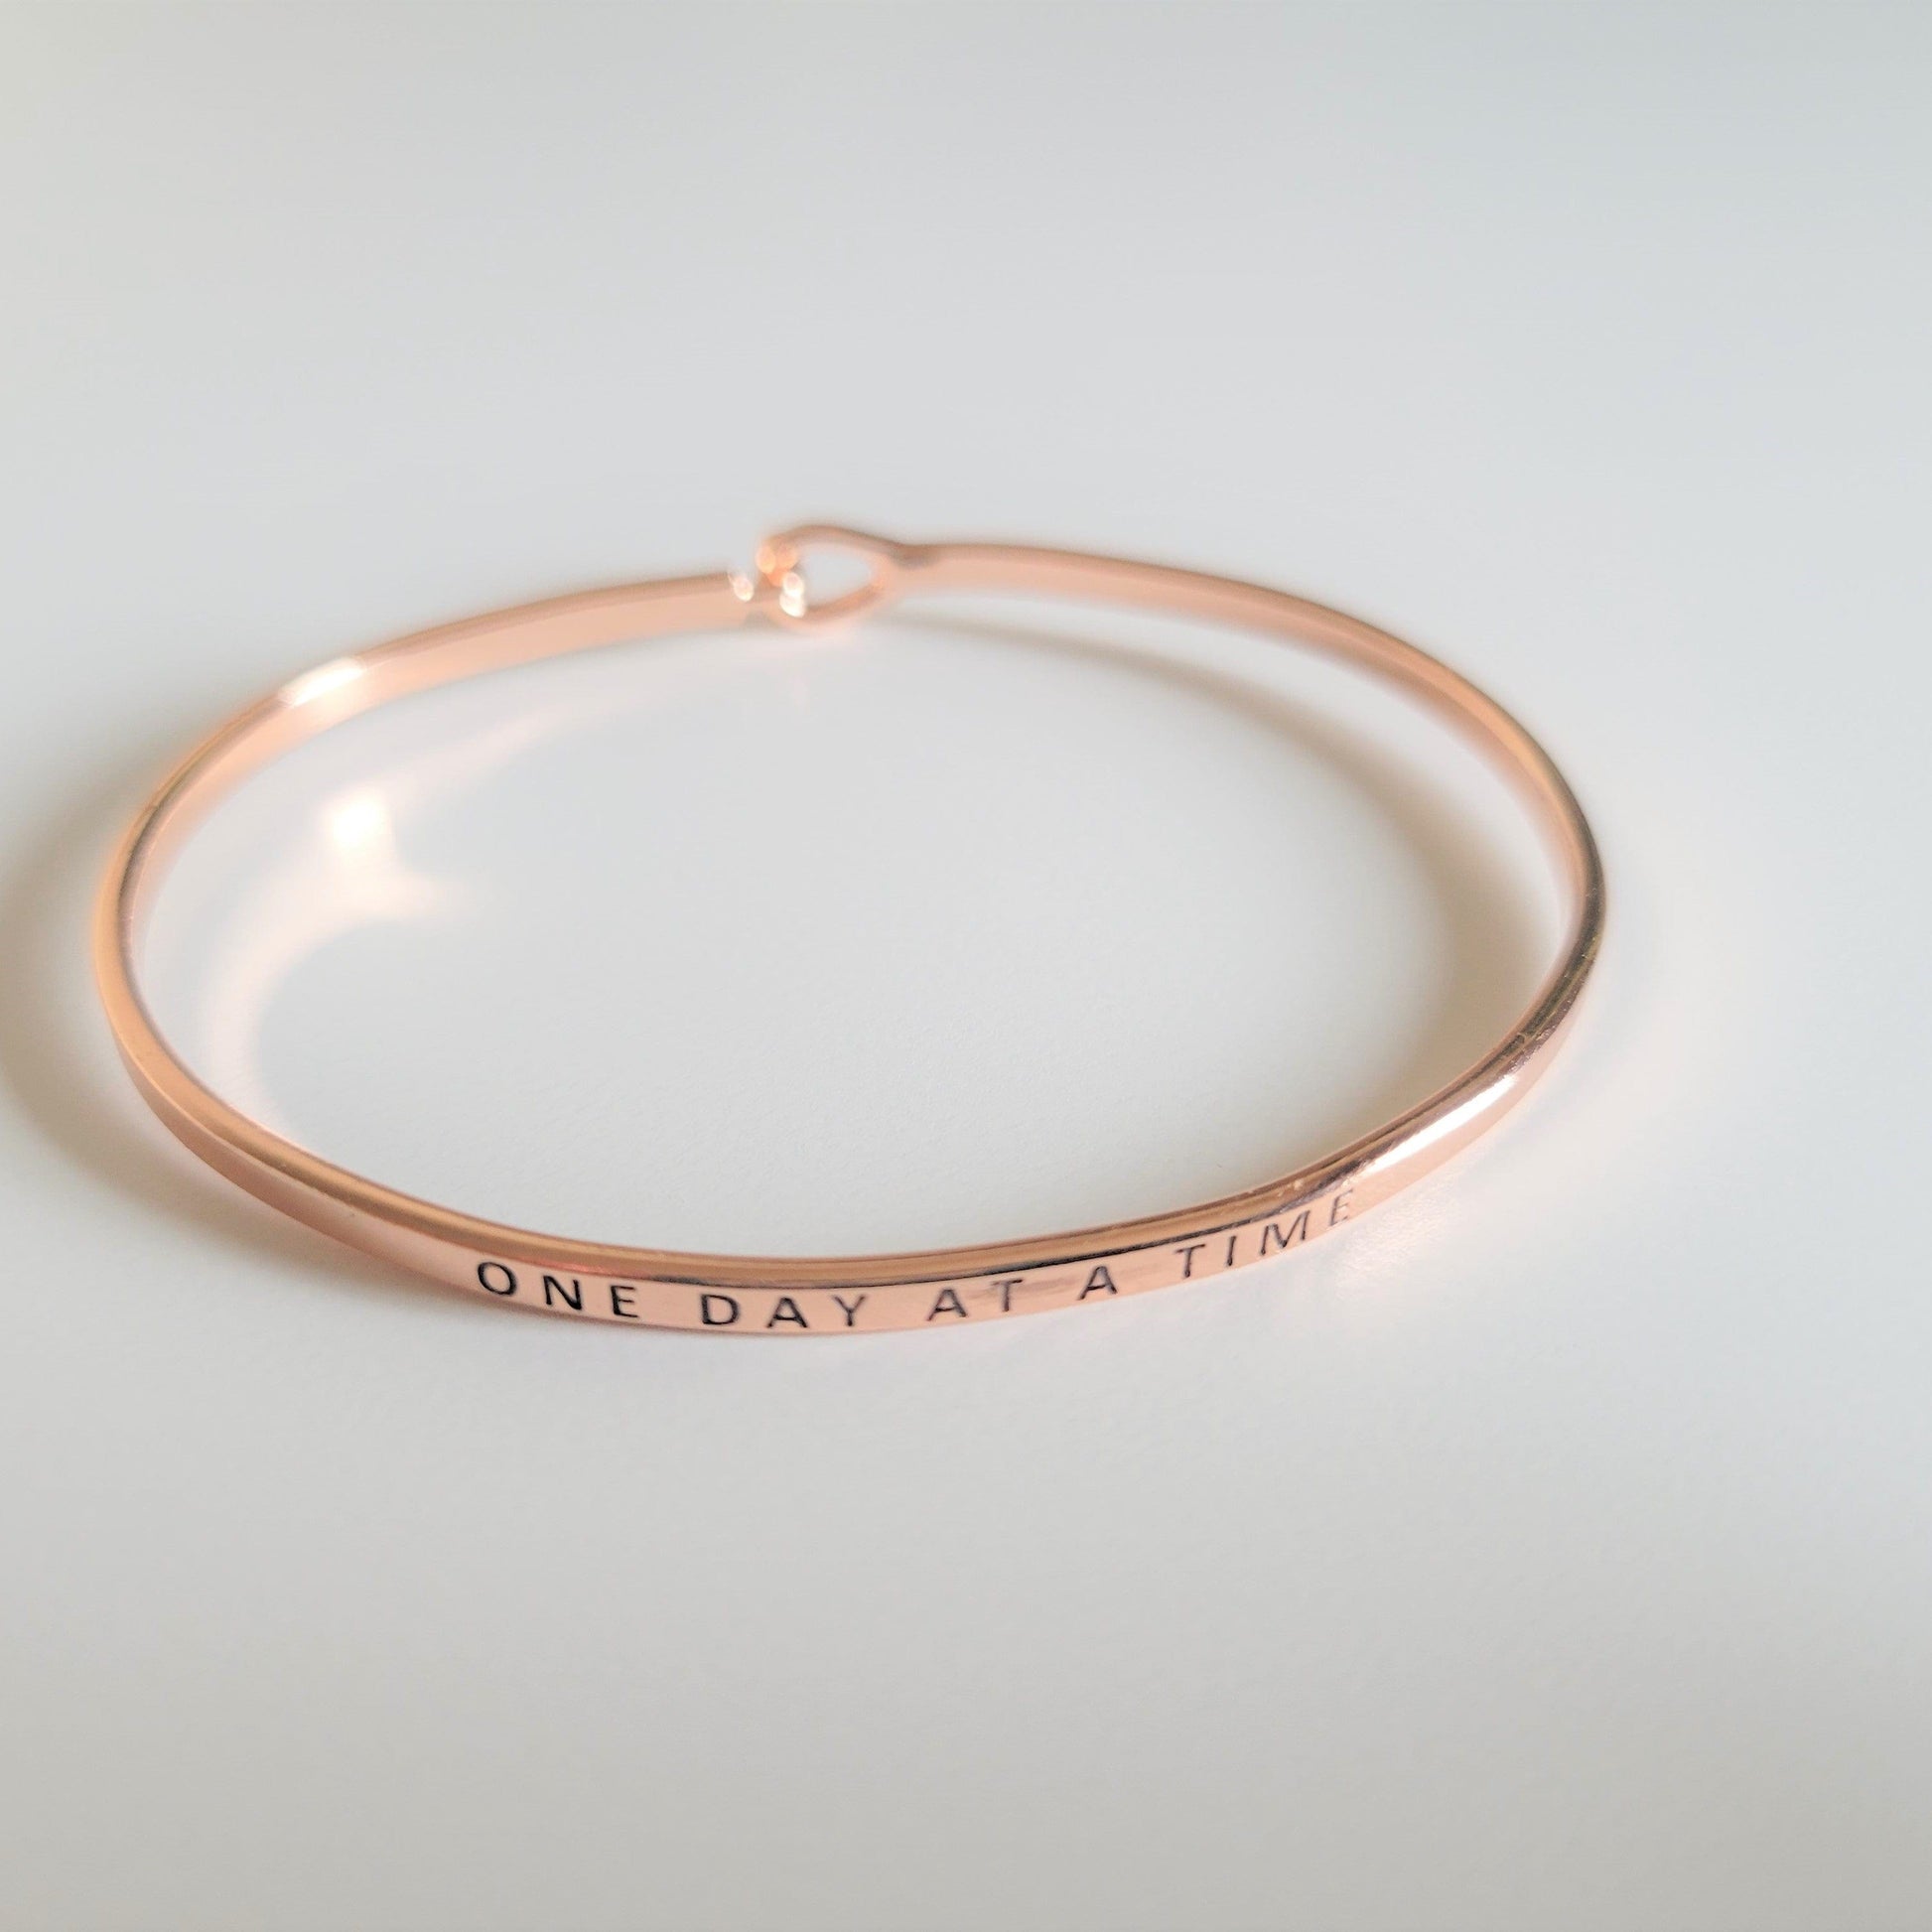 "One Day At A Time" Bracelet By Recovery Matters Rose Gold